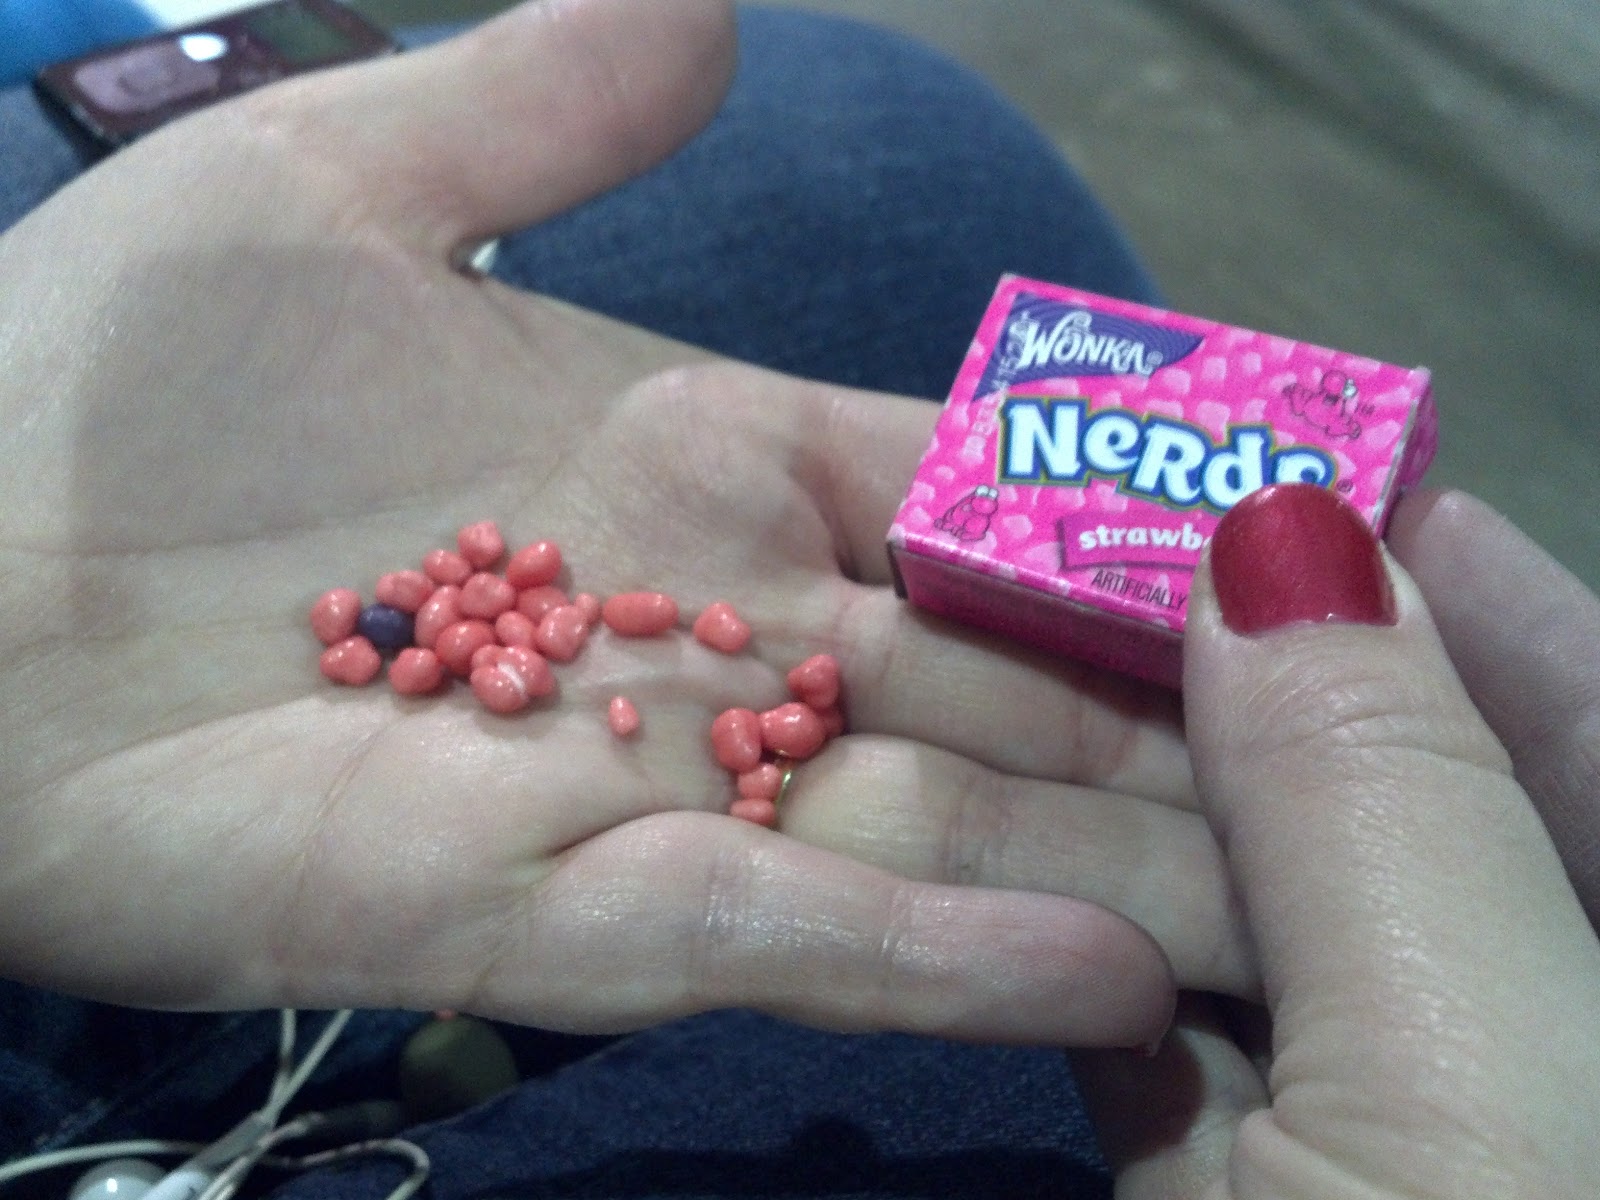 The Best Candy Is: Nerds, the Gravel at the Bottom of Your Fish Tank